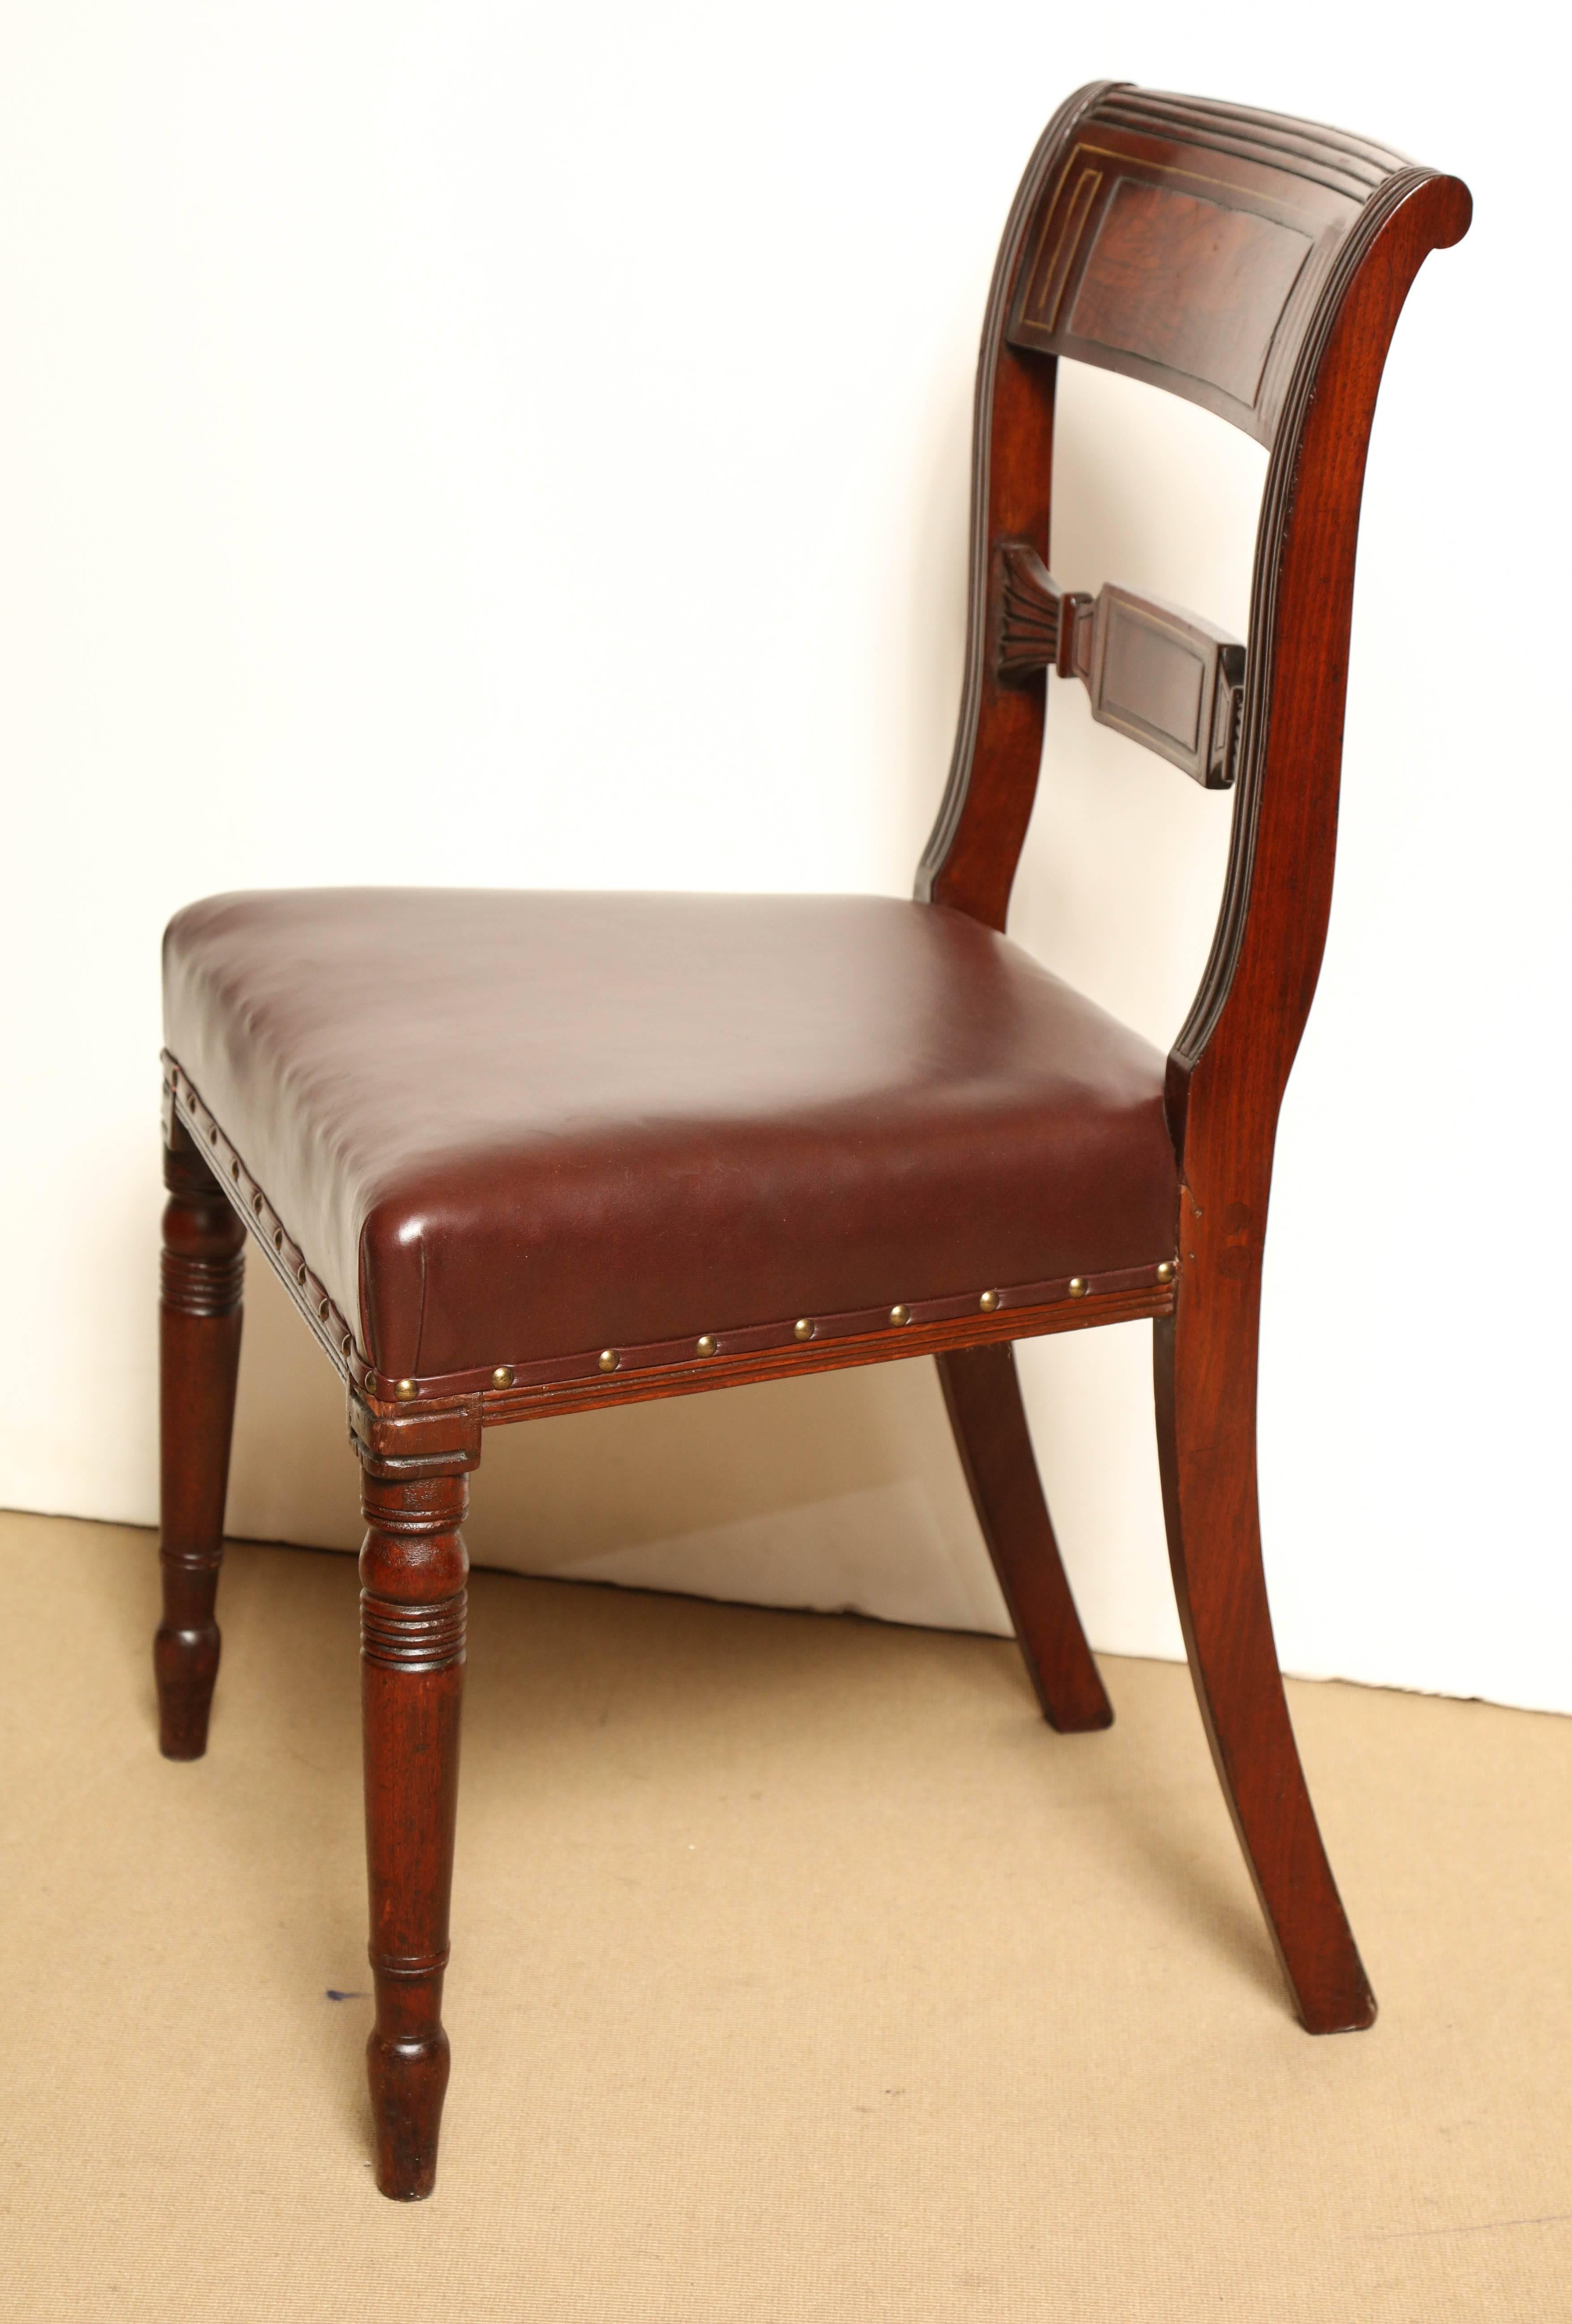 Pair of Early 19th Century English Regency Side Chairs 3